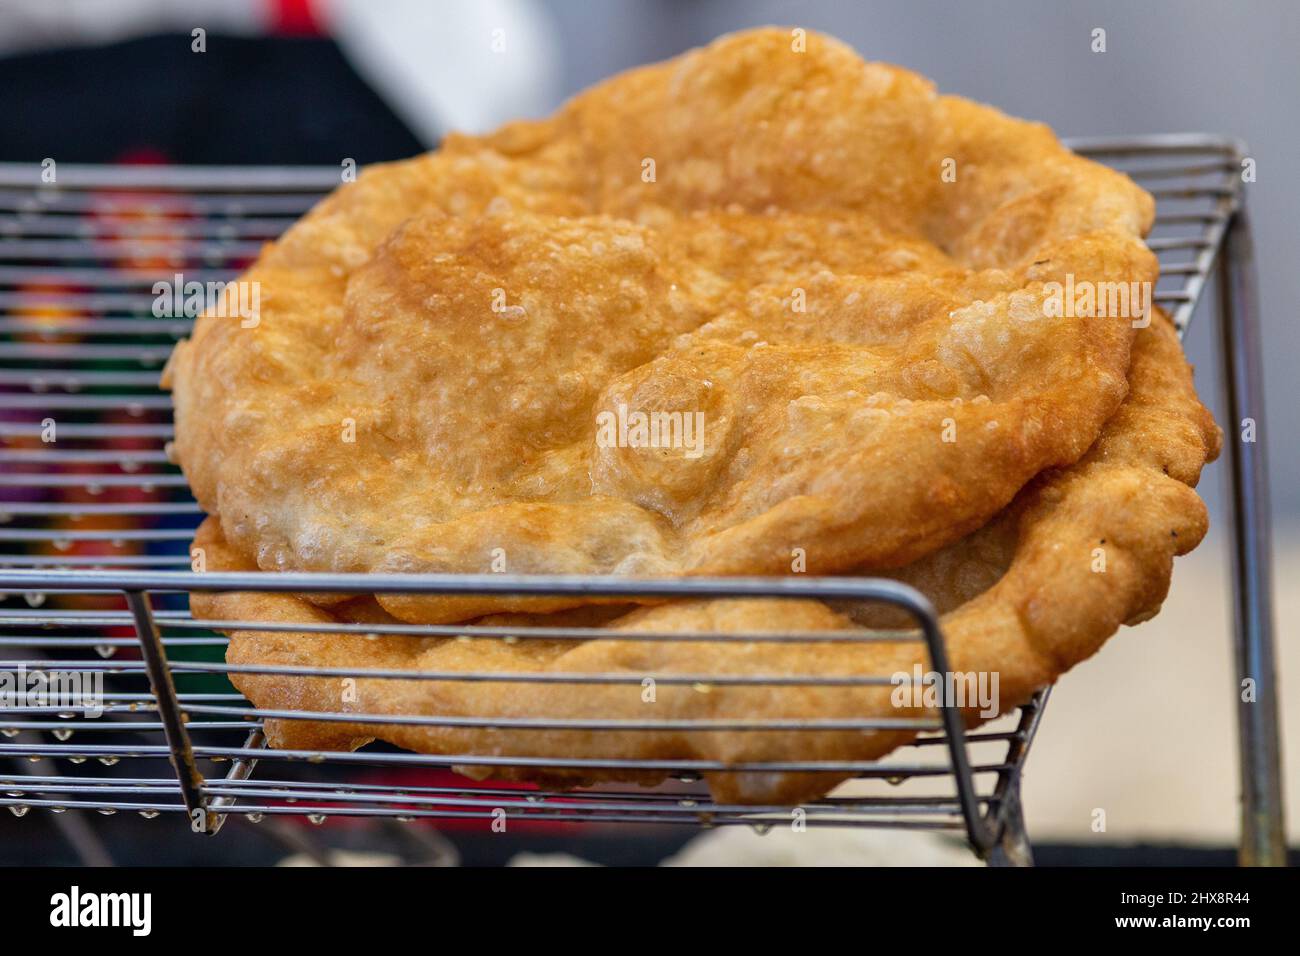 Freshly baked langos offered on the market. Hungarian speciality, a deep fried flat bread made of potato-based dough offered on the market. Stock Photo